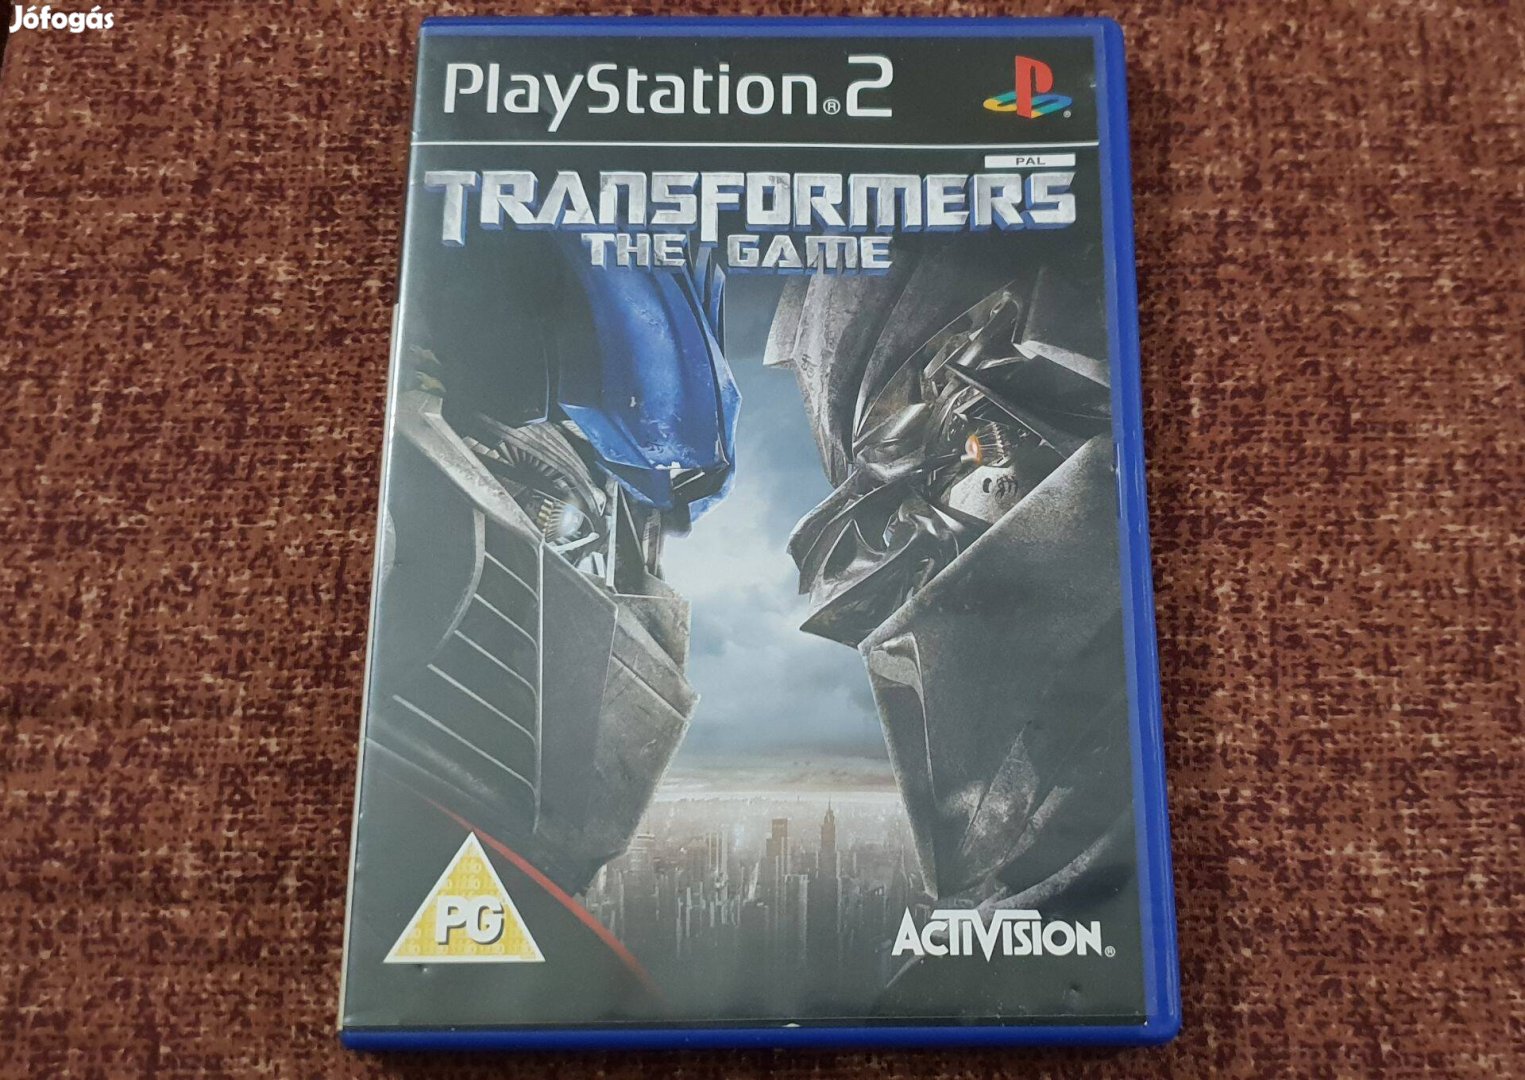 Transformers The Game Playstation 2 eredeti lemez ( 4000 Ft )